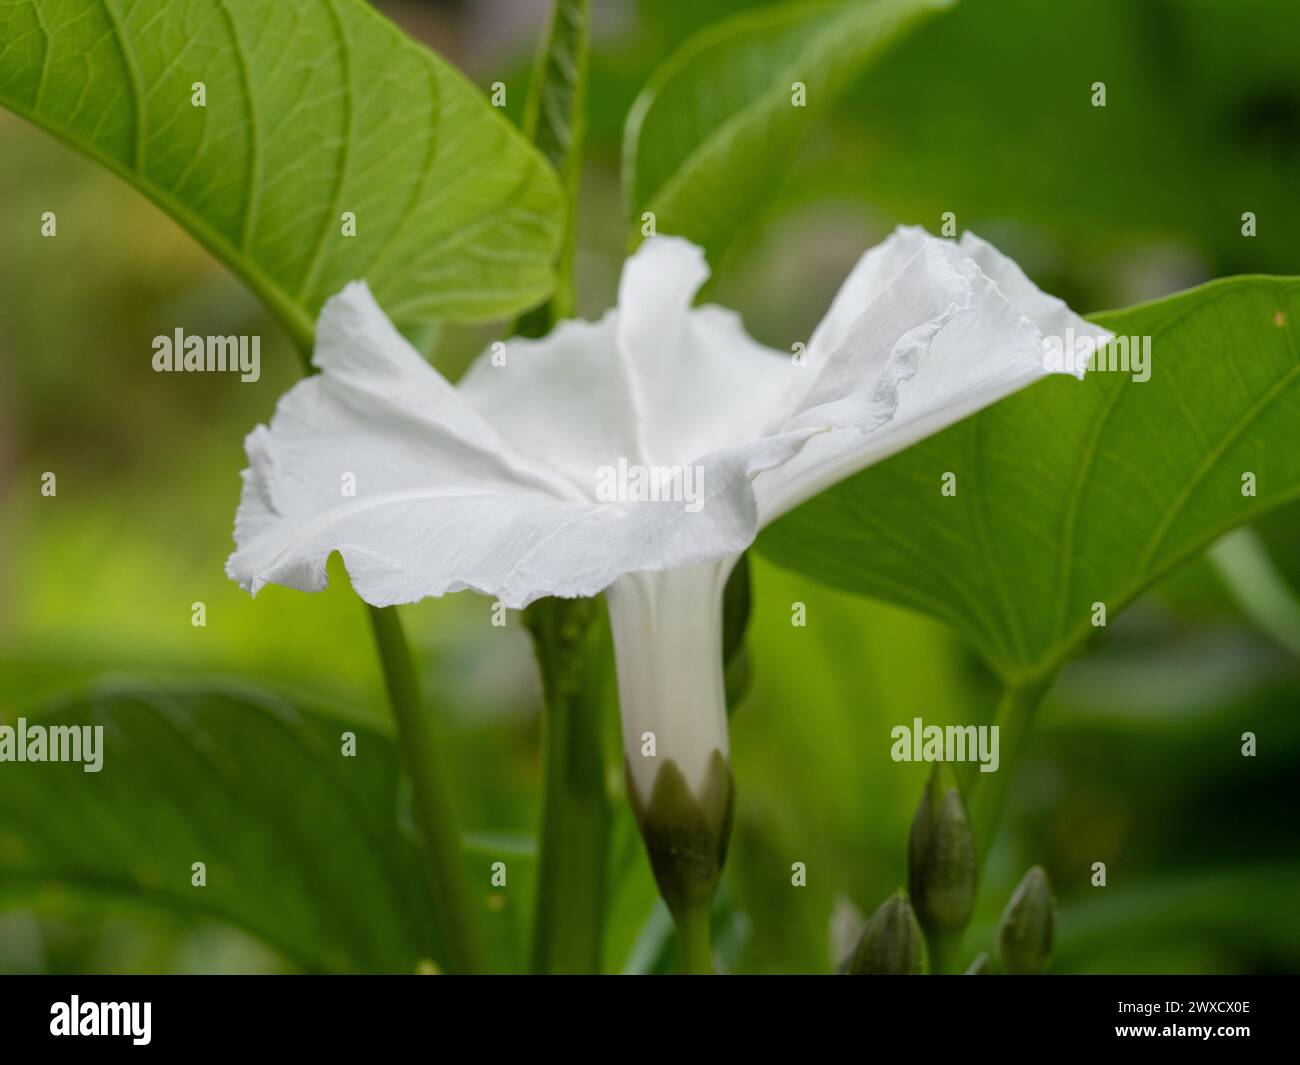 White flower bloom of the green leafy Kangkong or water Spinach on a curved stem growing in a vegetable garden Stock Photo